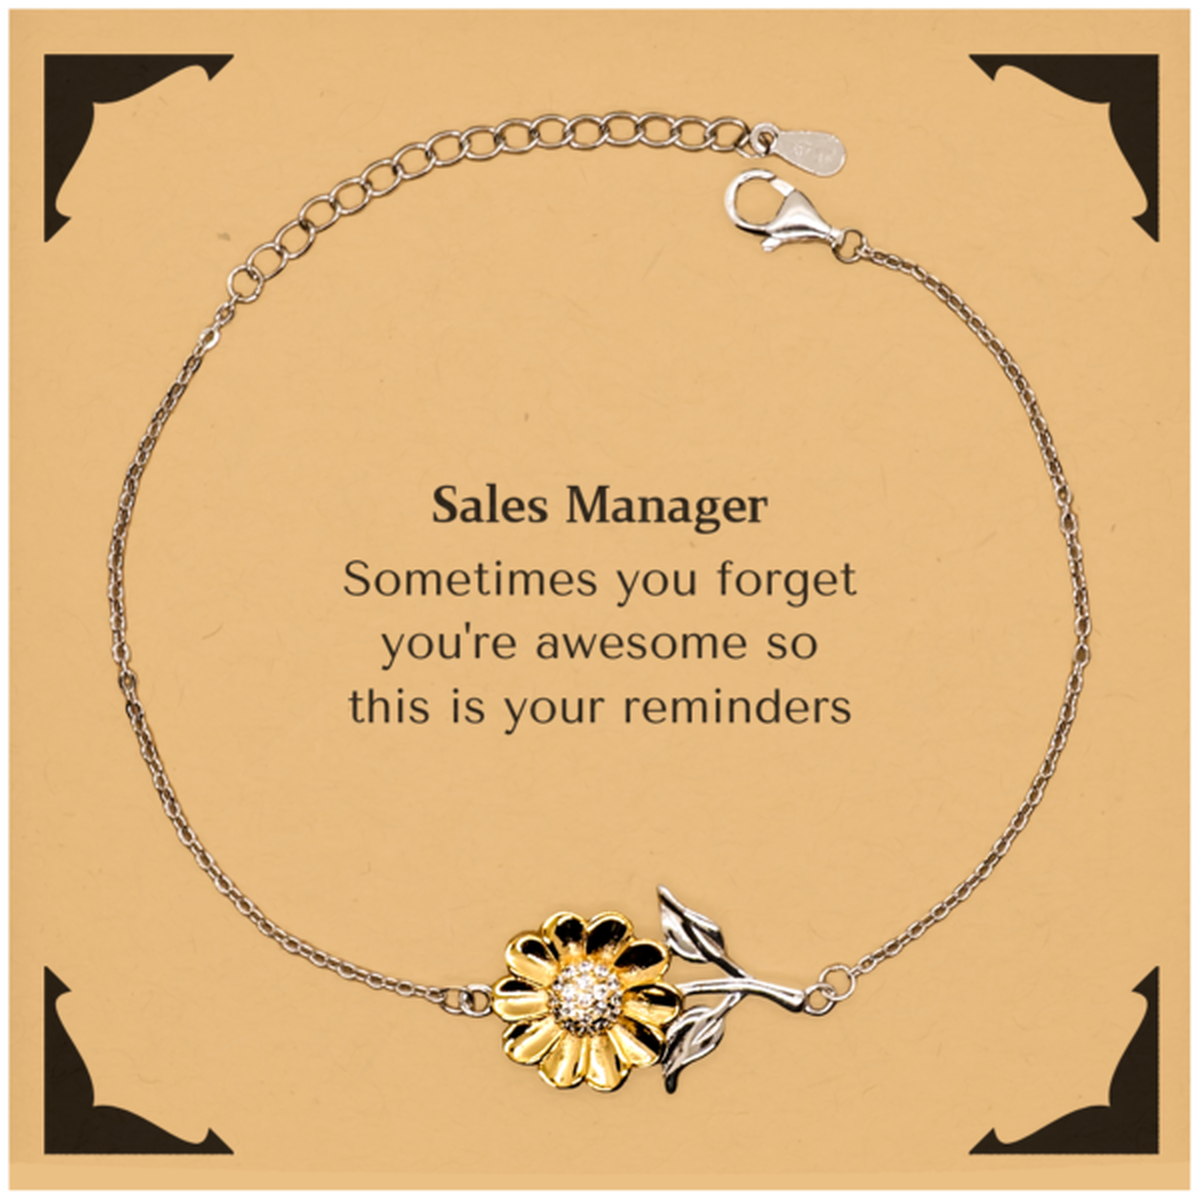 Sentimental Sales Manager Sunflower Bracelet, Sales Manager Sometimes you forget you're awesome so this is your reminders, Graduation Christmas Birthday Gifts for Sales Manager, Men, Women, Coworkers